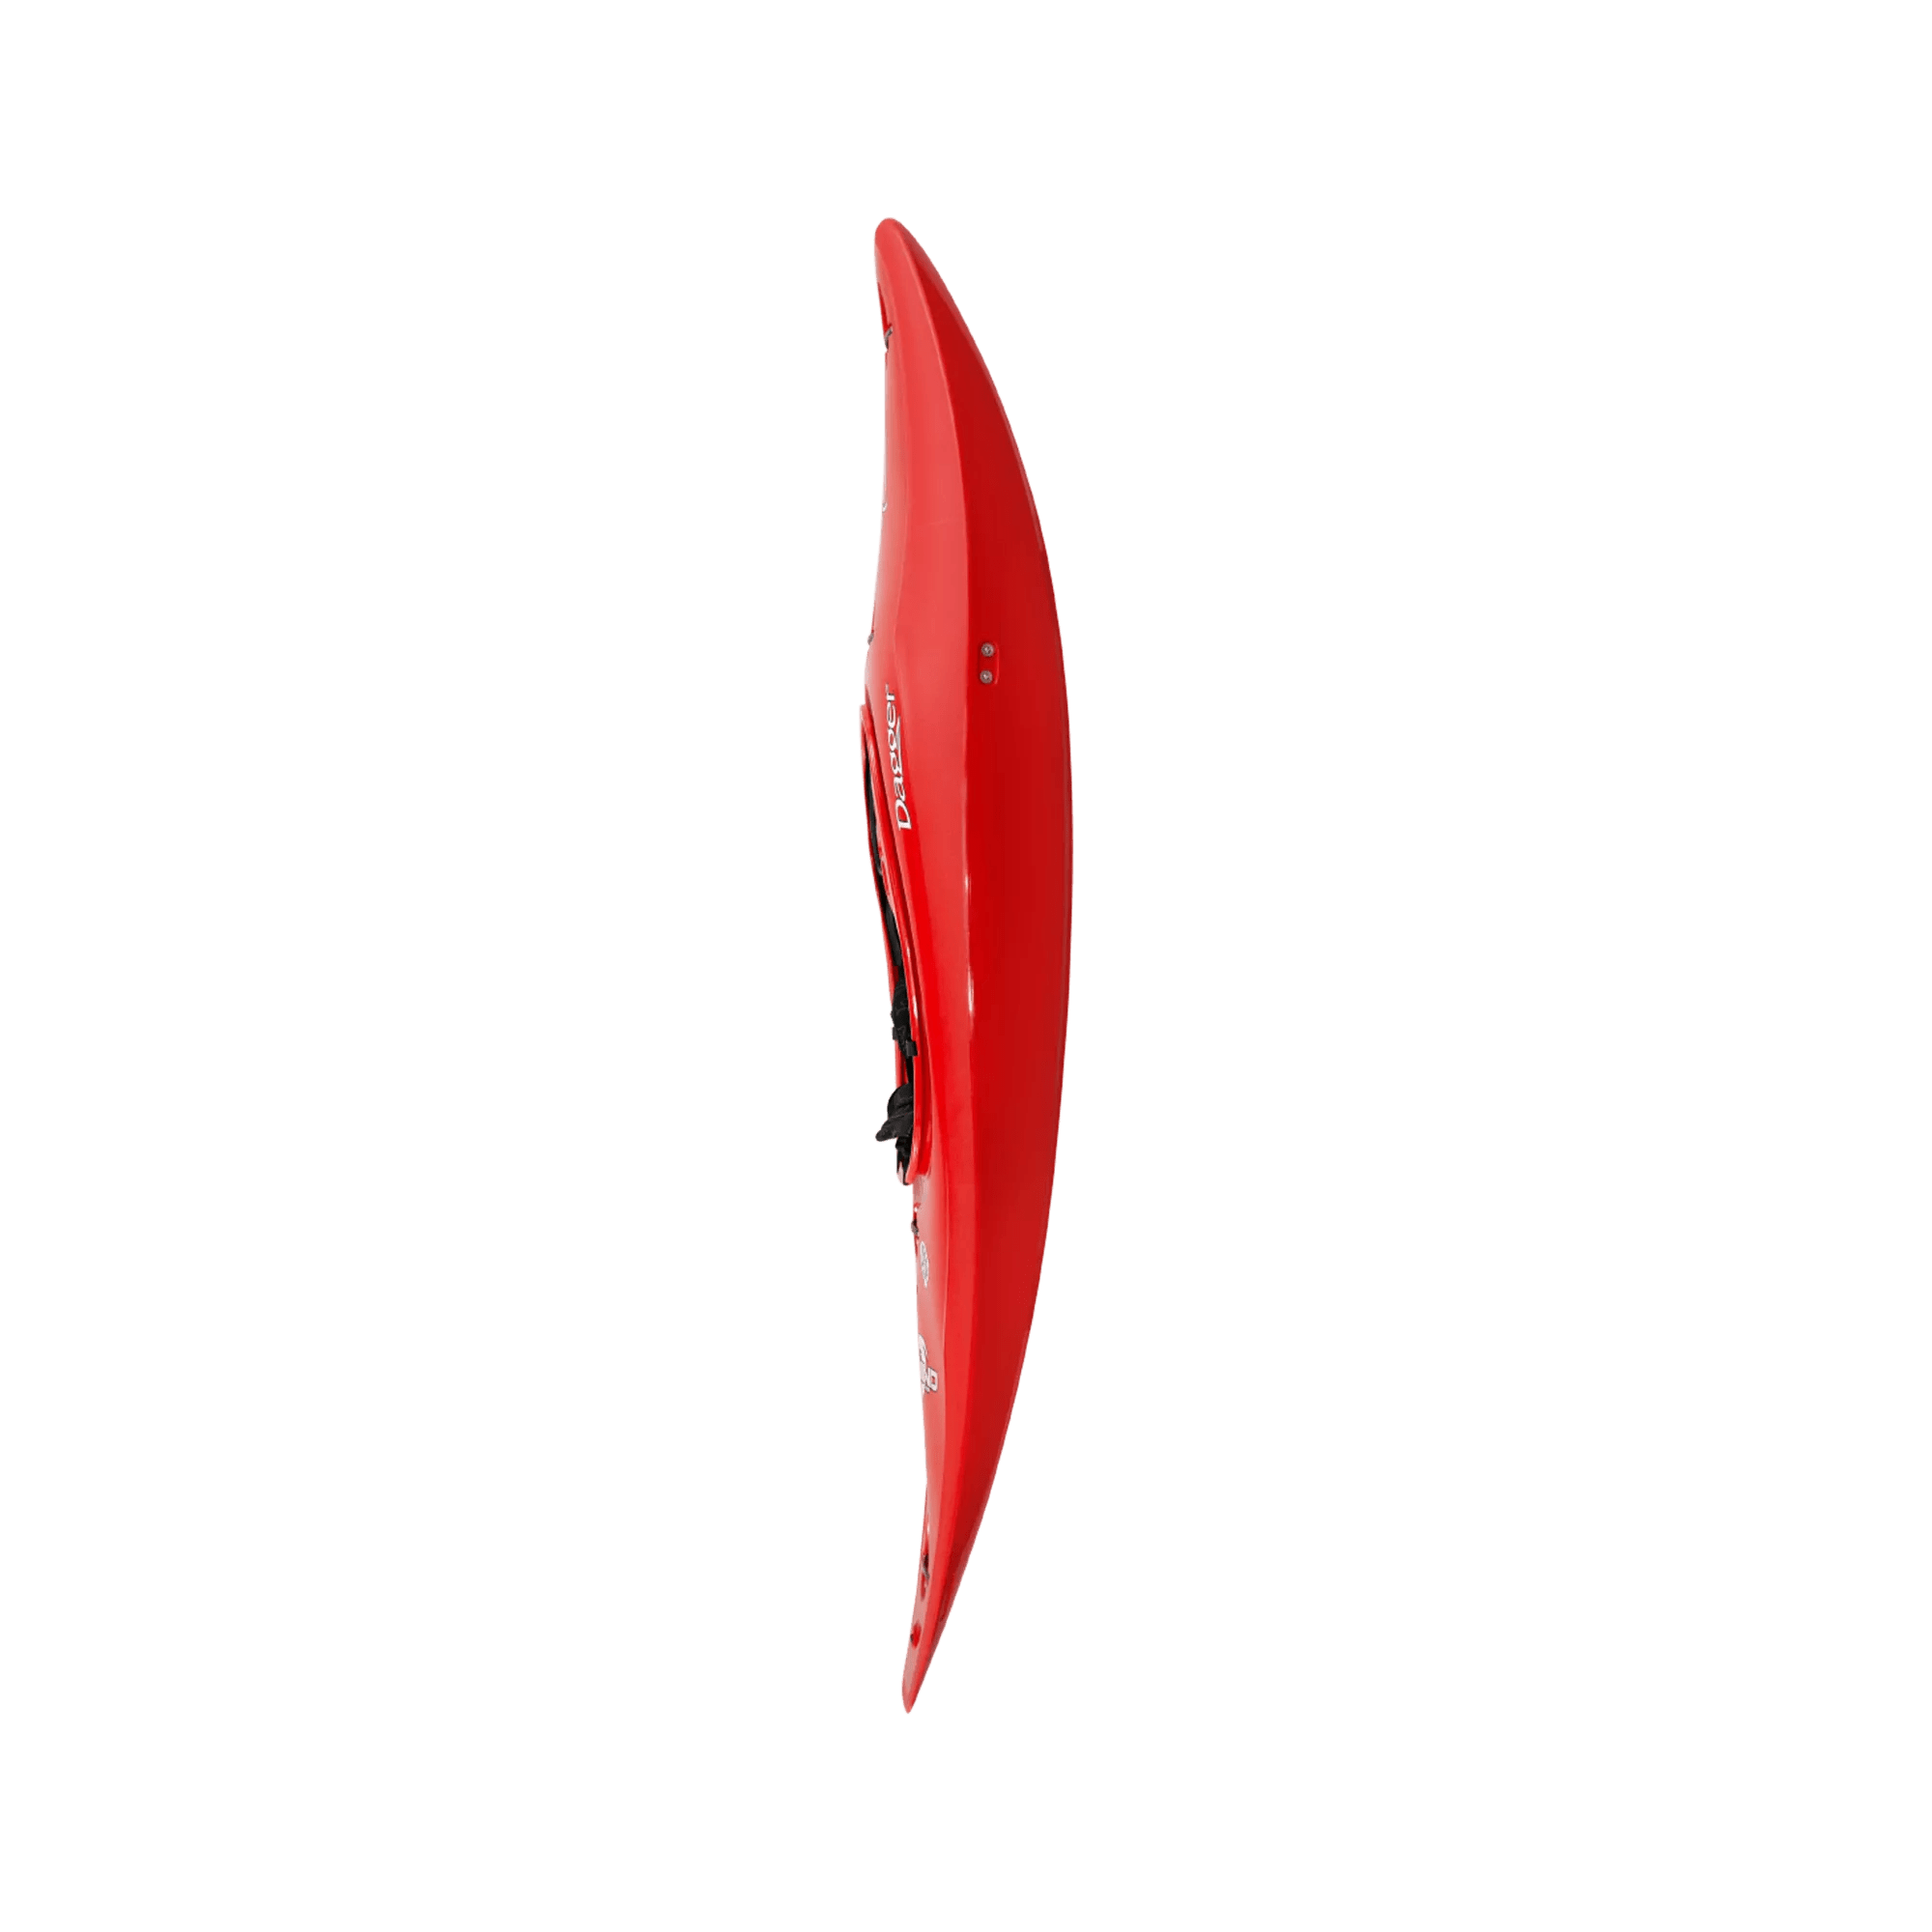 DAGGER - Rewind SM River Play Whitewater Kayak - Red - 9010470057 - SIDE